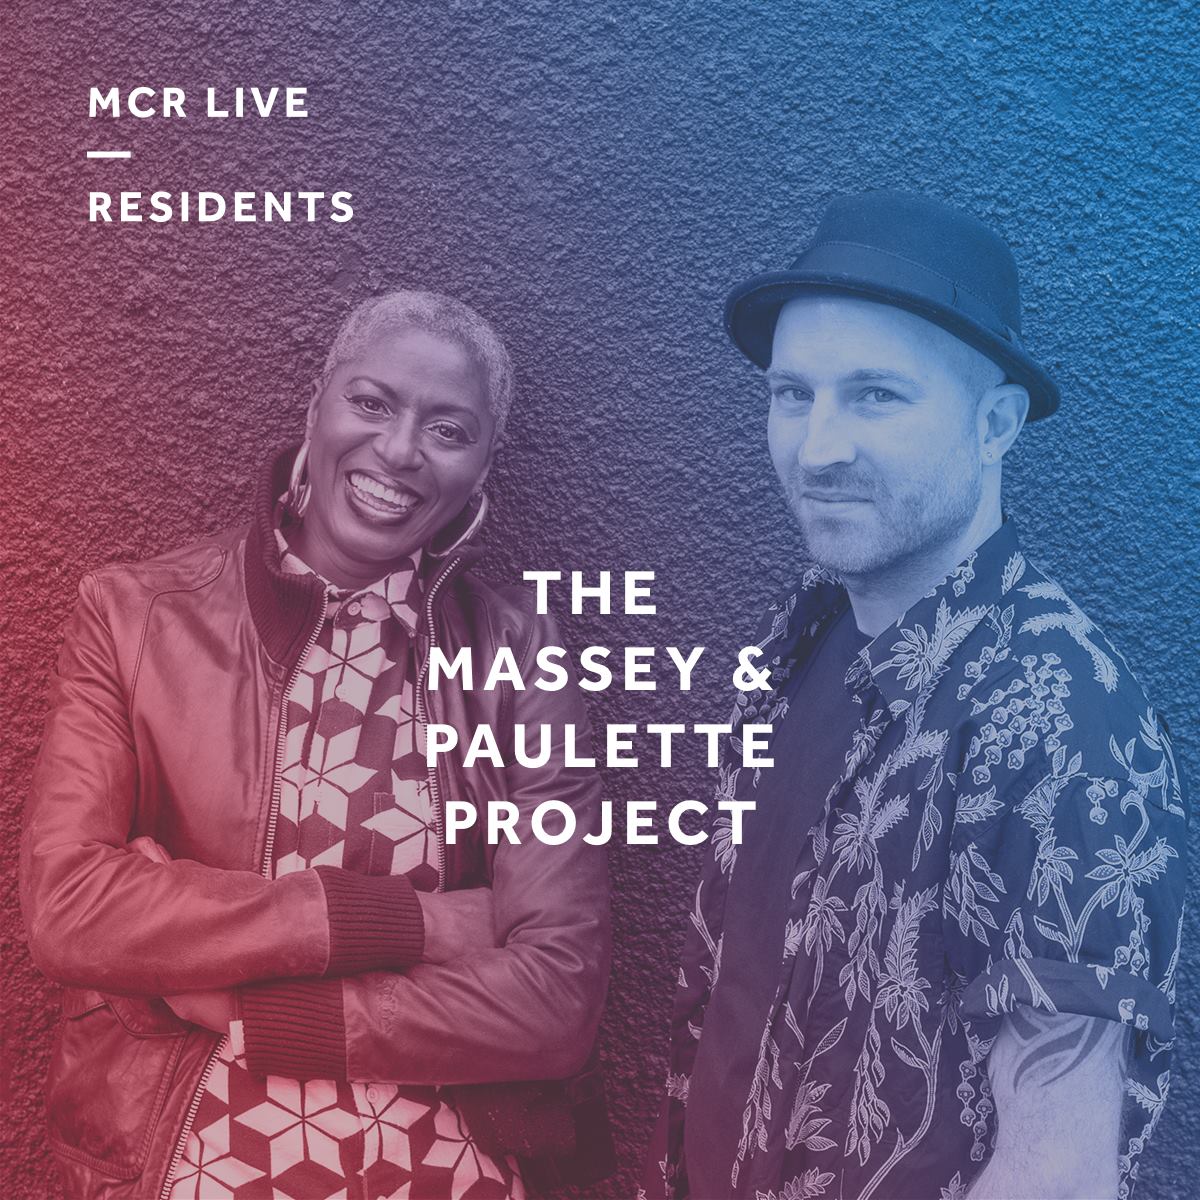 #ONAIR MASSEY AND PAULETTE PROJECT: MCR LIVE 07/06/2018